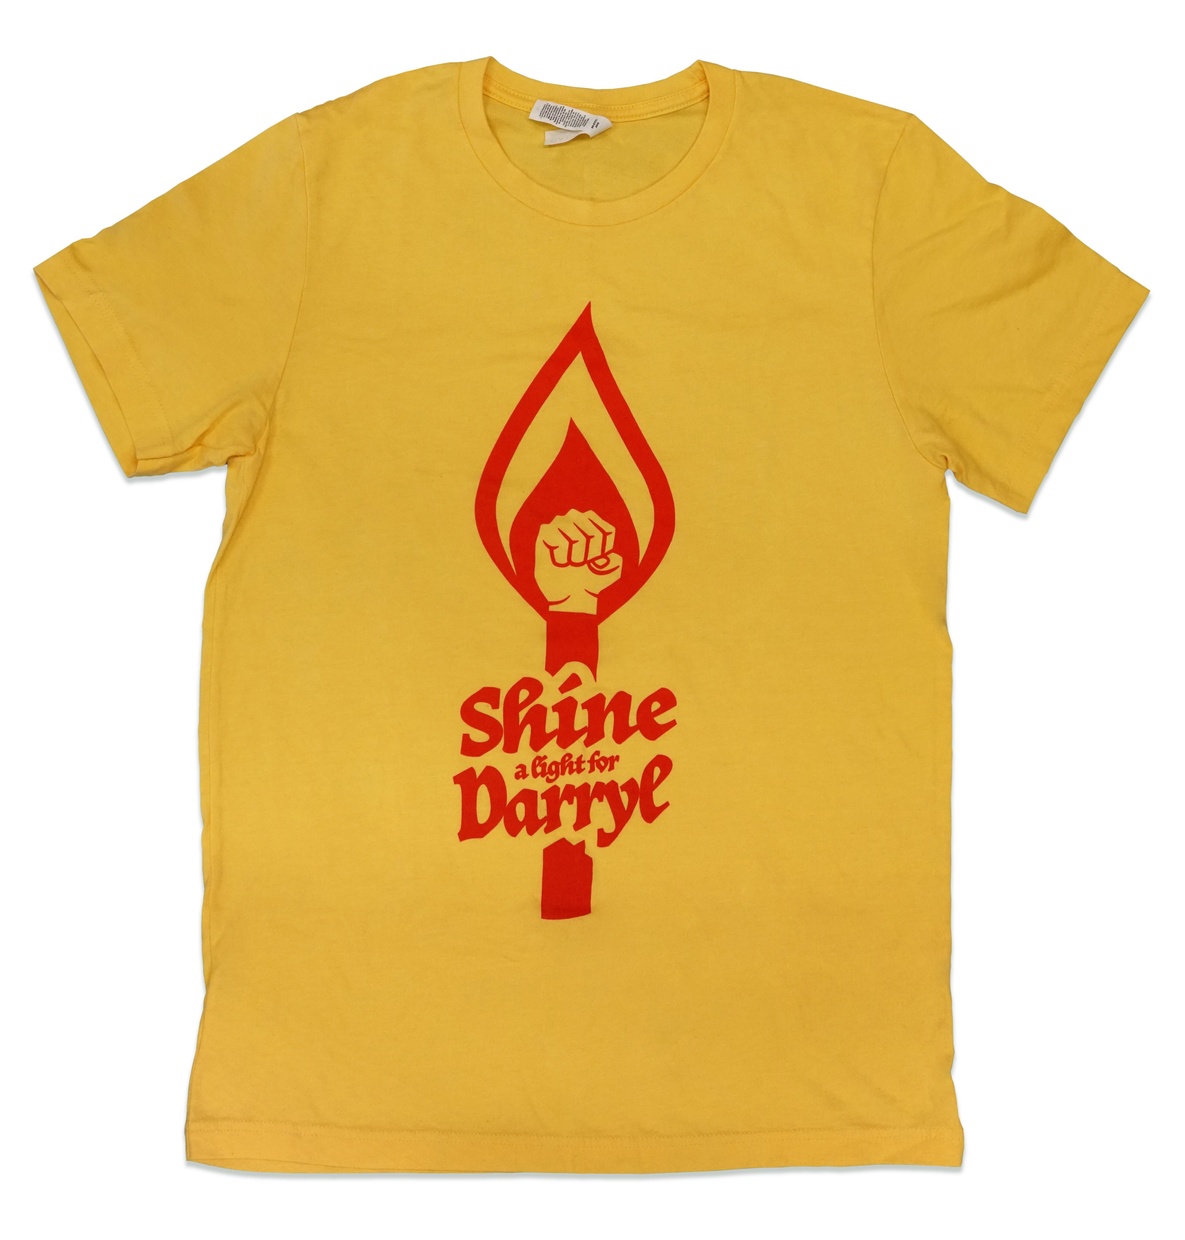 A yellow t-shirt with red graphic image of a fist inside a flame and the words “Shine a Light for Darryl Mount” underneath.